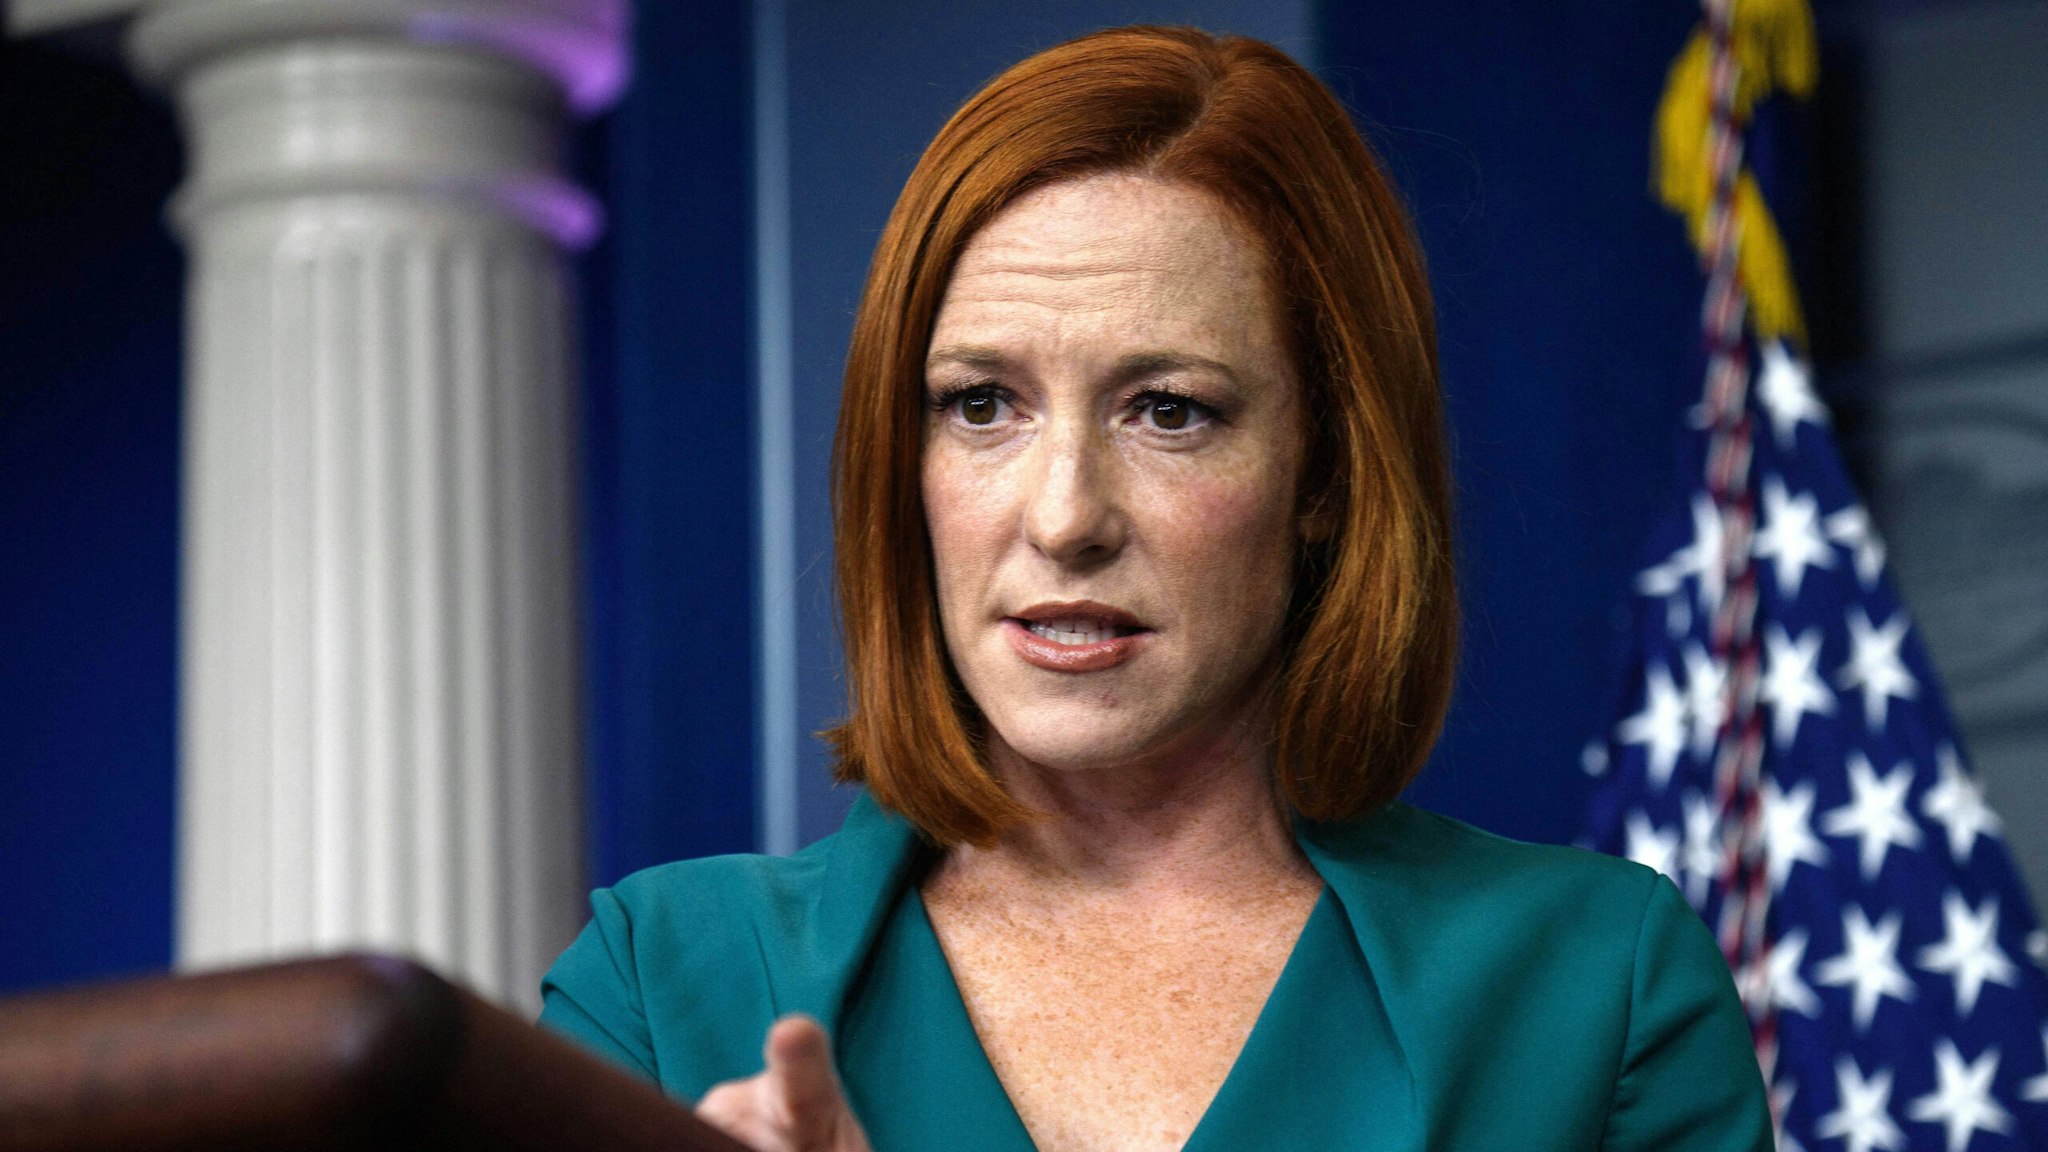 White House Press Secretary Jen Psaki speaks during the daily press briefing at the White House in Washington, DC, on October 6, 2021.